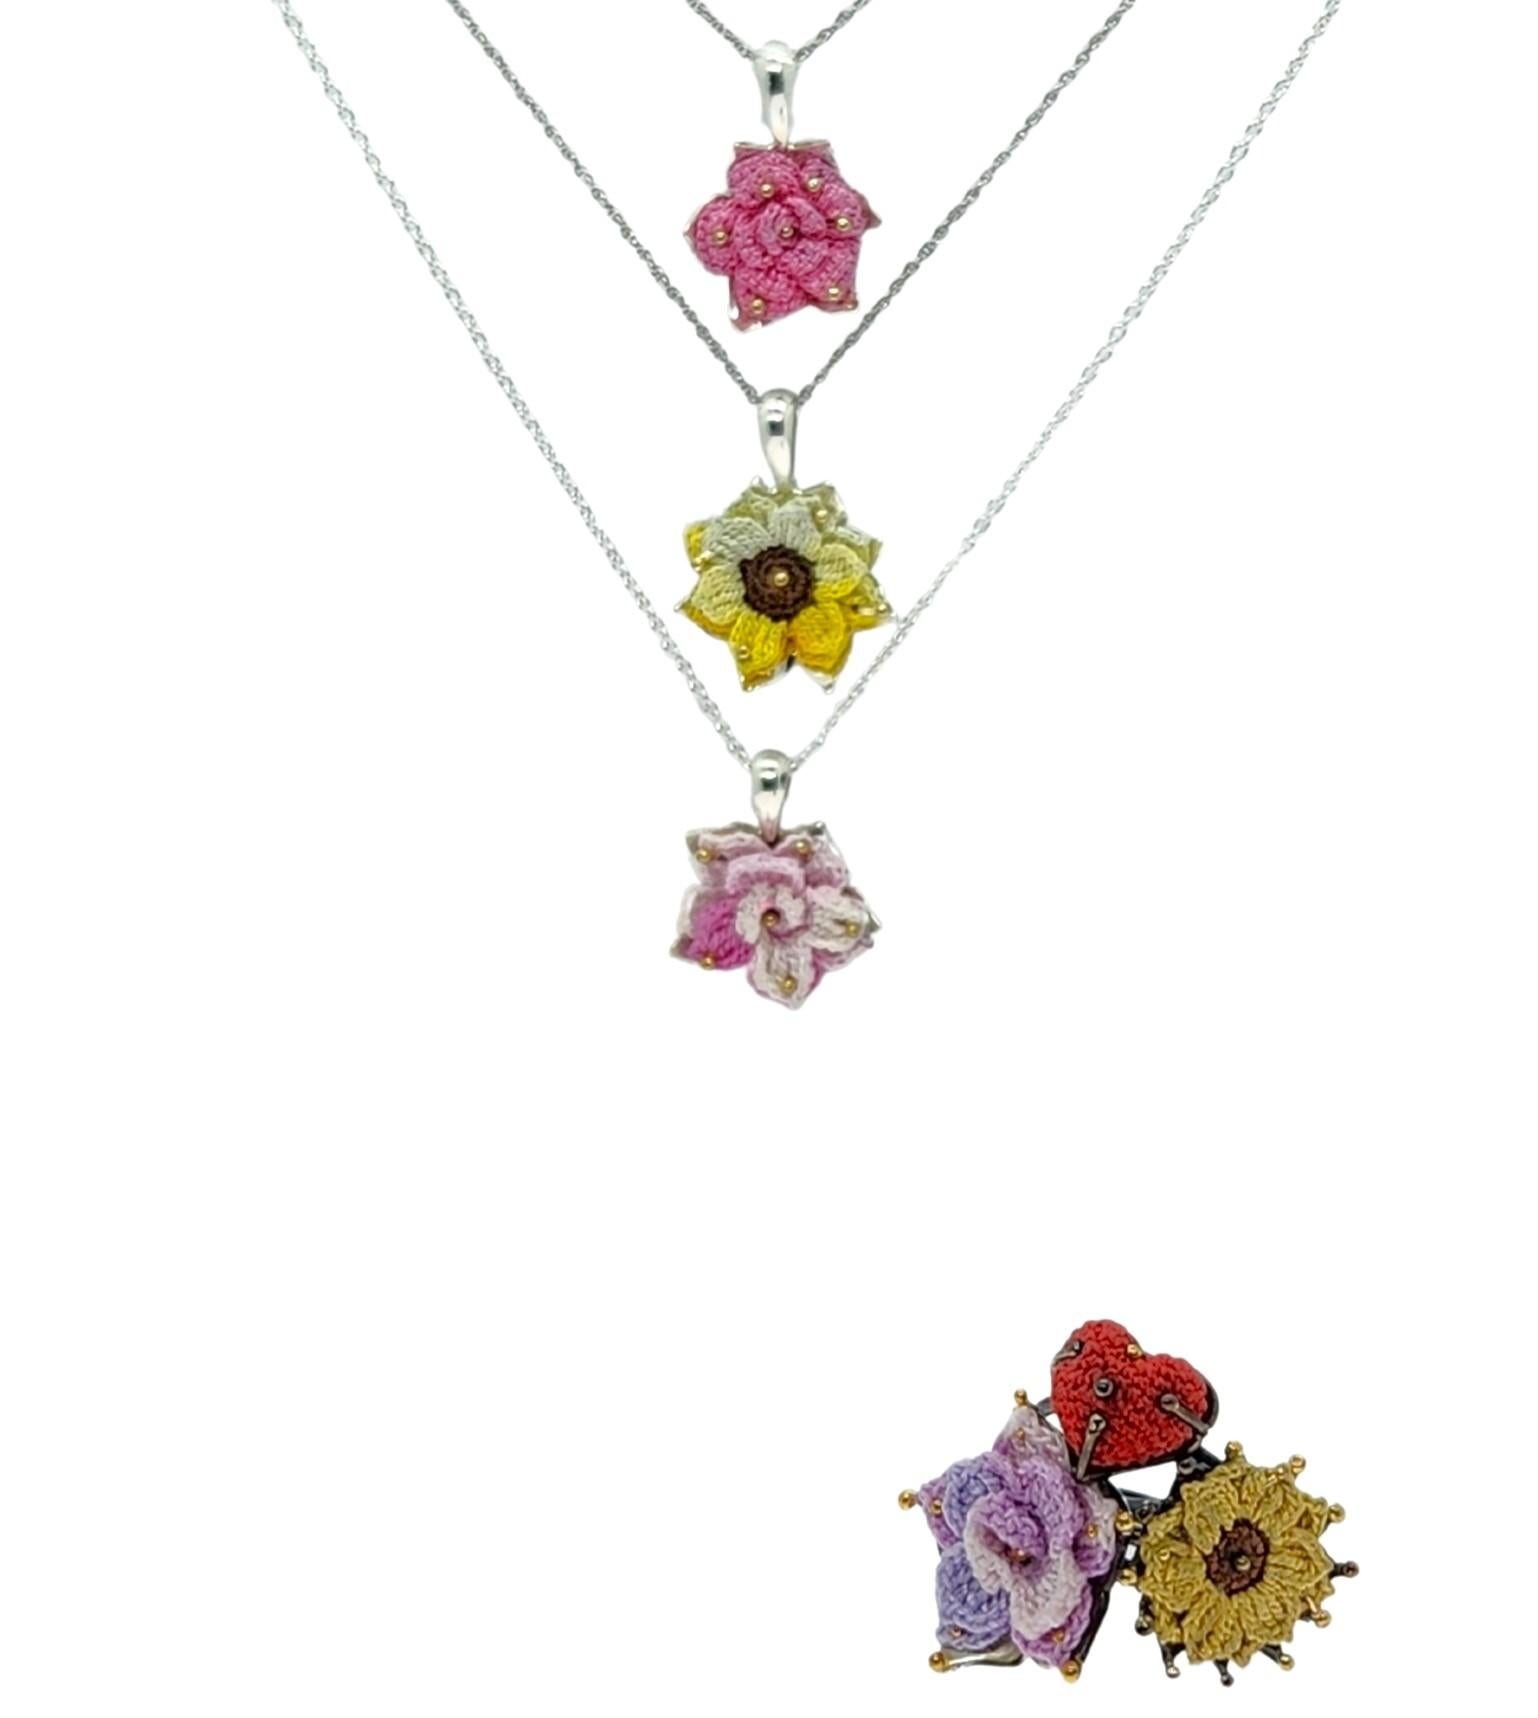 Hand Knit Flower Necklace in Handmade Sterling Silver and 14KY Gold Setting #1 In New Condition For Sale In Rutherford, NJ